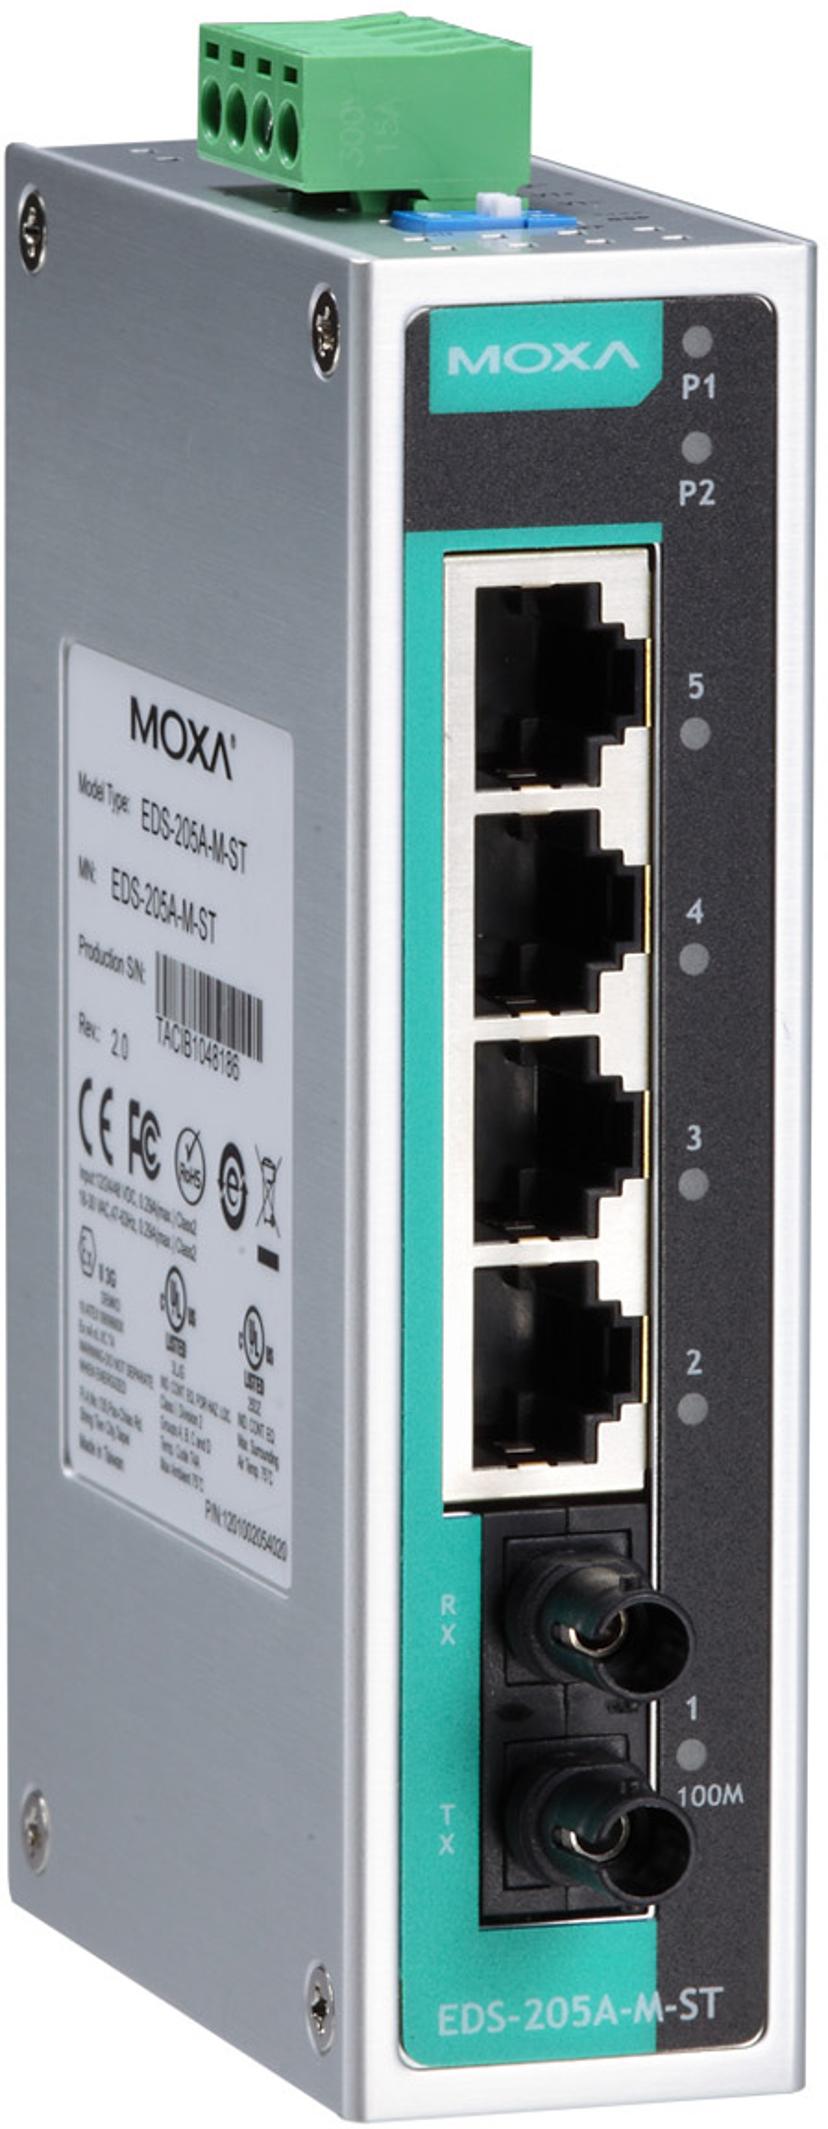 Moxa EDS-205A Industrial Unmanaged 5-Port Switch